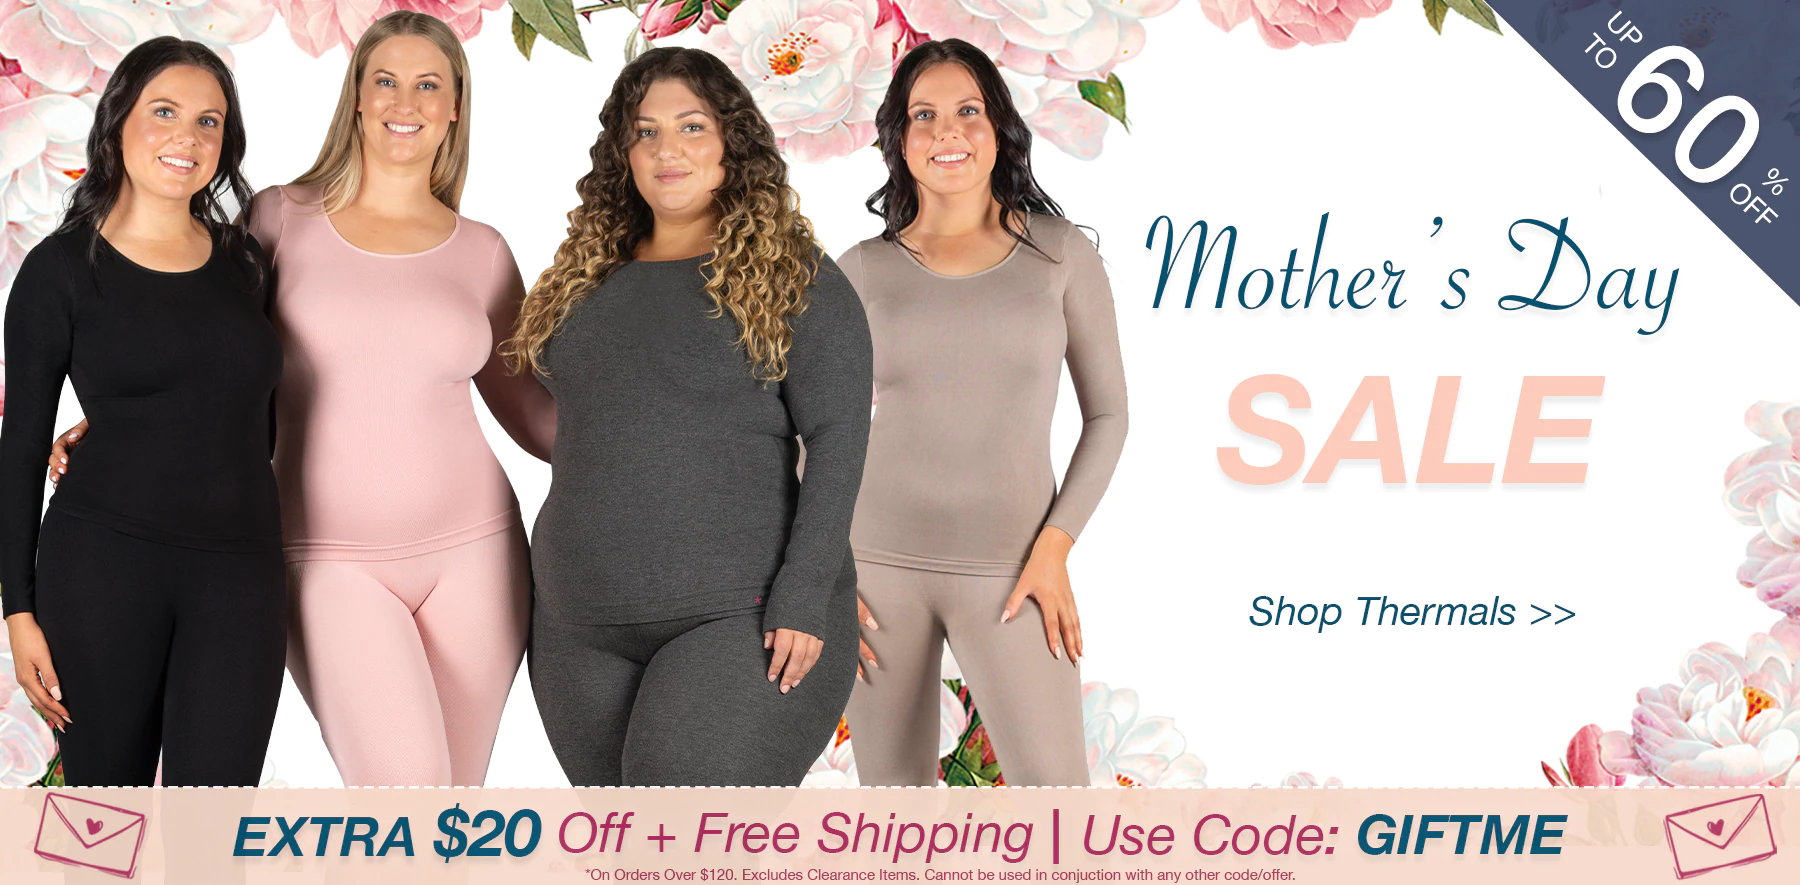 $20 OFF + free shipping on orders over $120 with this B Free Intimate Apparel voucher code